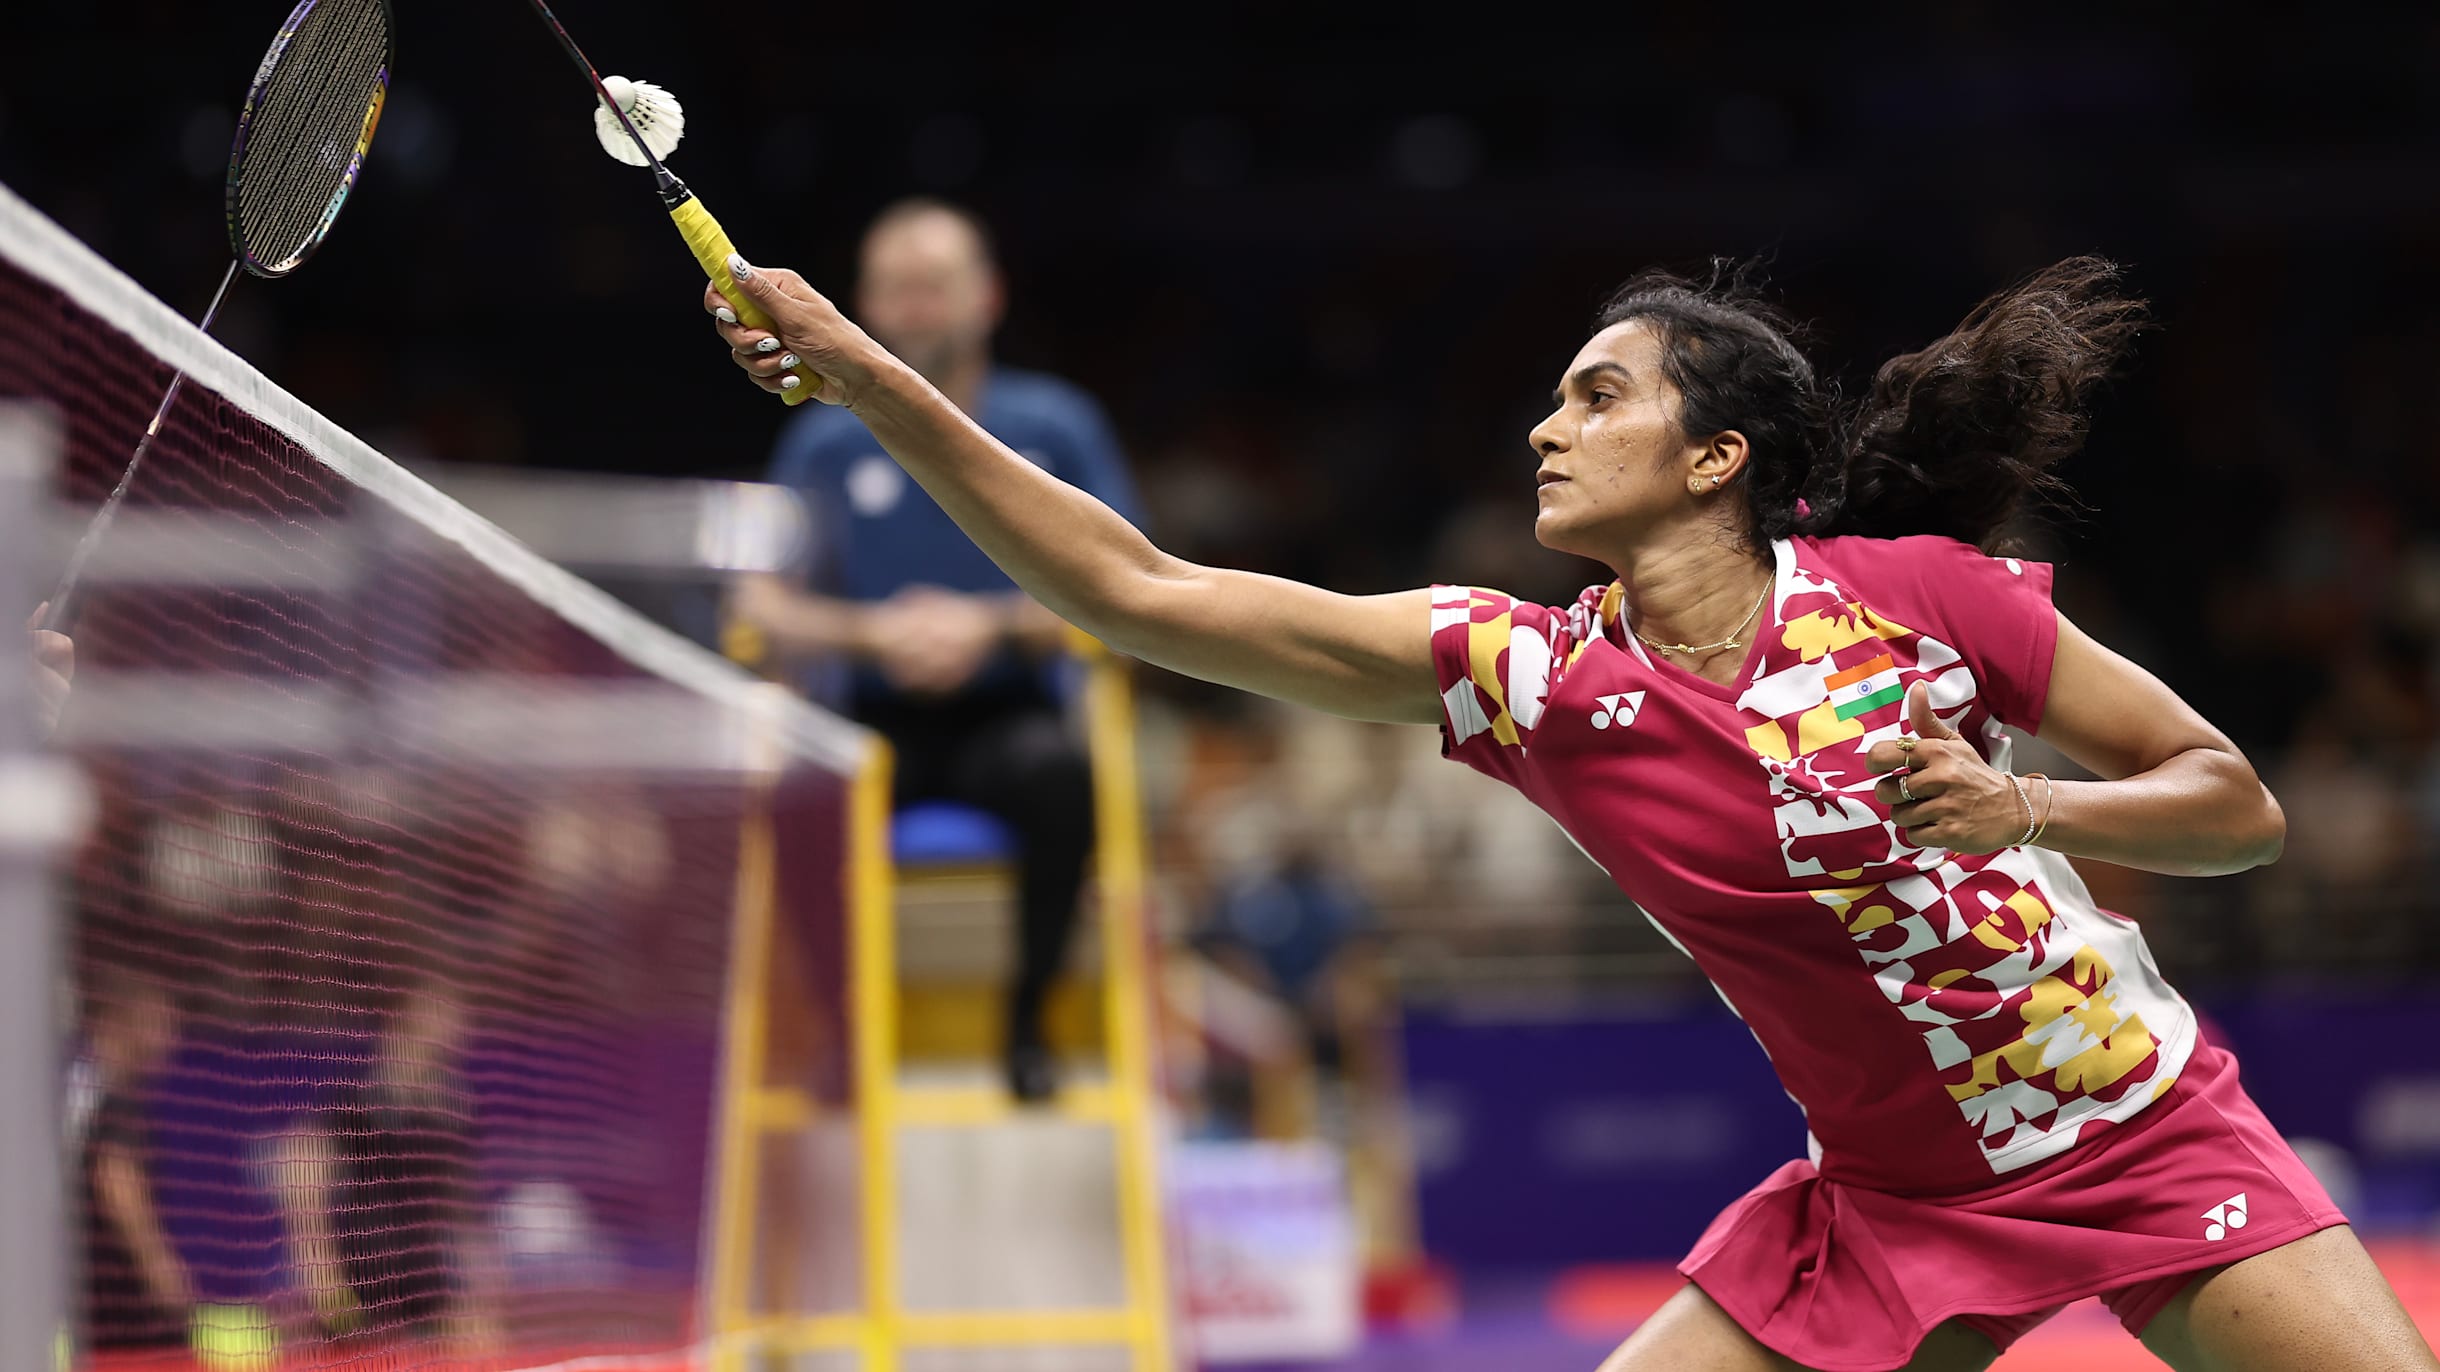 Arctic Open 2023 badminton Where to watch live streaming in India